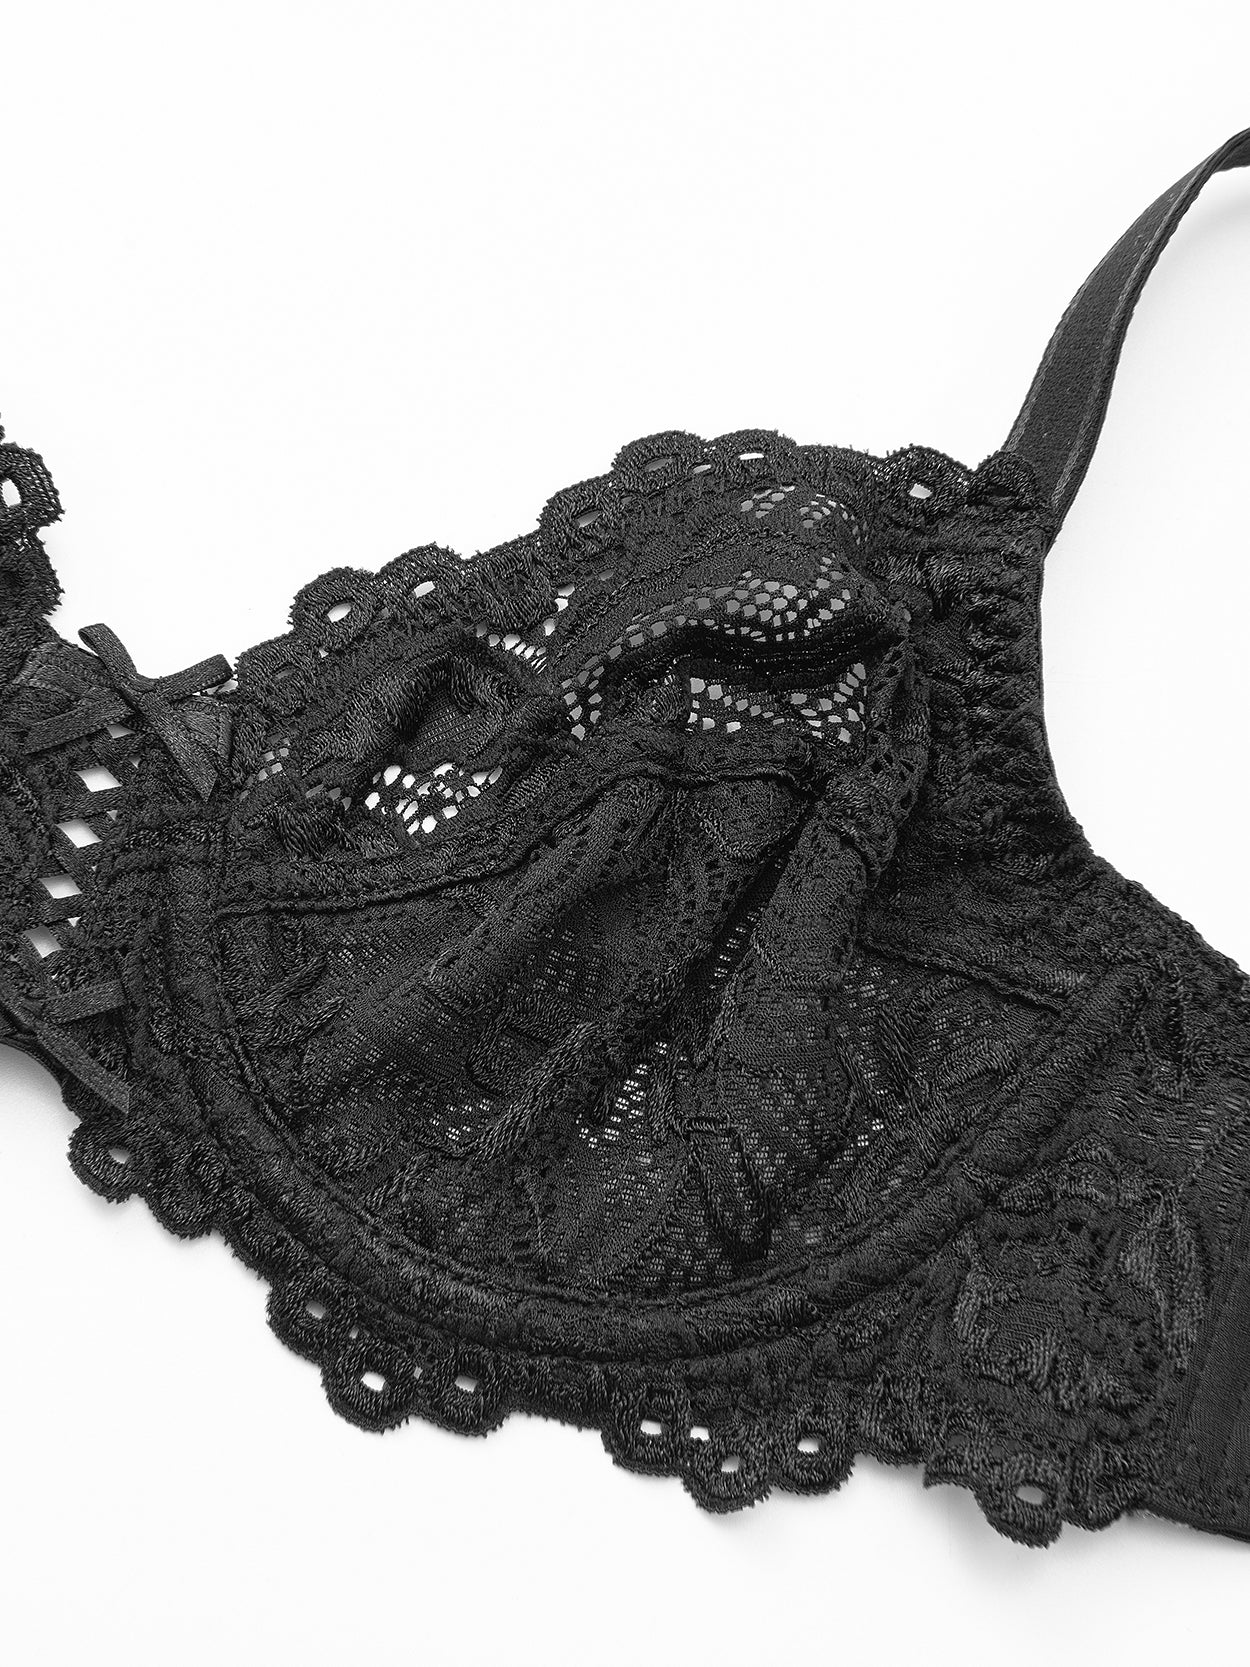 Fsqjgq Plus Size Lace Floral Bra for Women Lingerie Push up Gathered Full  Coverage Brassiere Solid Seamless Underwear B C D E Cup Black 34/75A